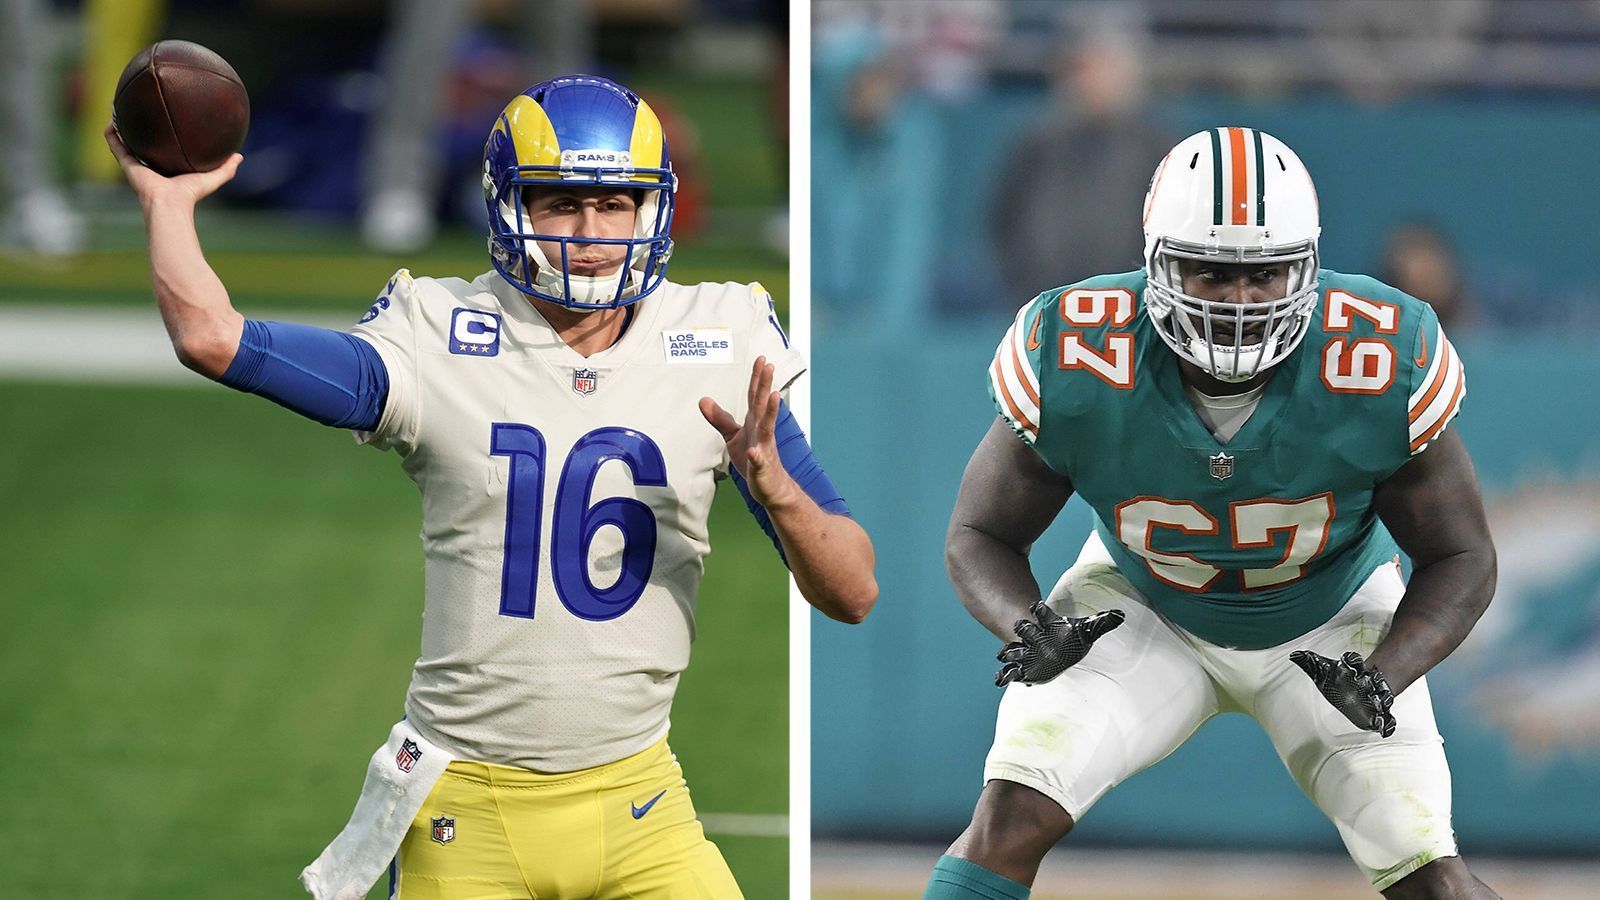 
                <strong>NFL Draft 2016</strong><br>
                &#x2022; Nummer-1-Pick: Quarterback <strong>Jared Goff</strong> – 3x Pro Bowl<br>&#x2022; Nummer-13-Pick: Offensive Tackle <strong>Laremy Tunsil</strong> – 3x Pro Bowl<br>
              